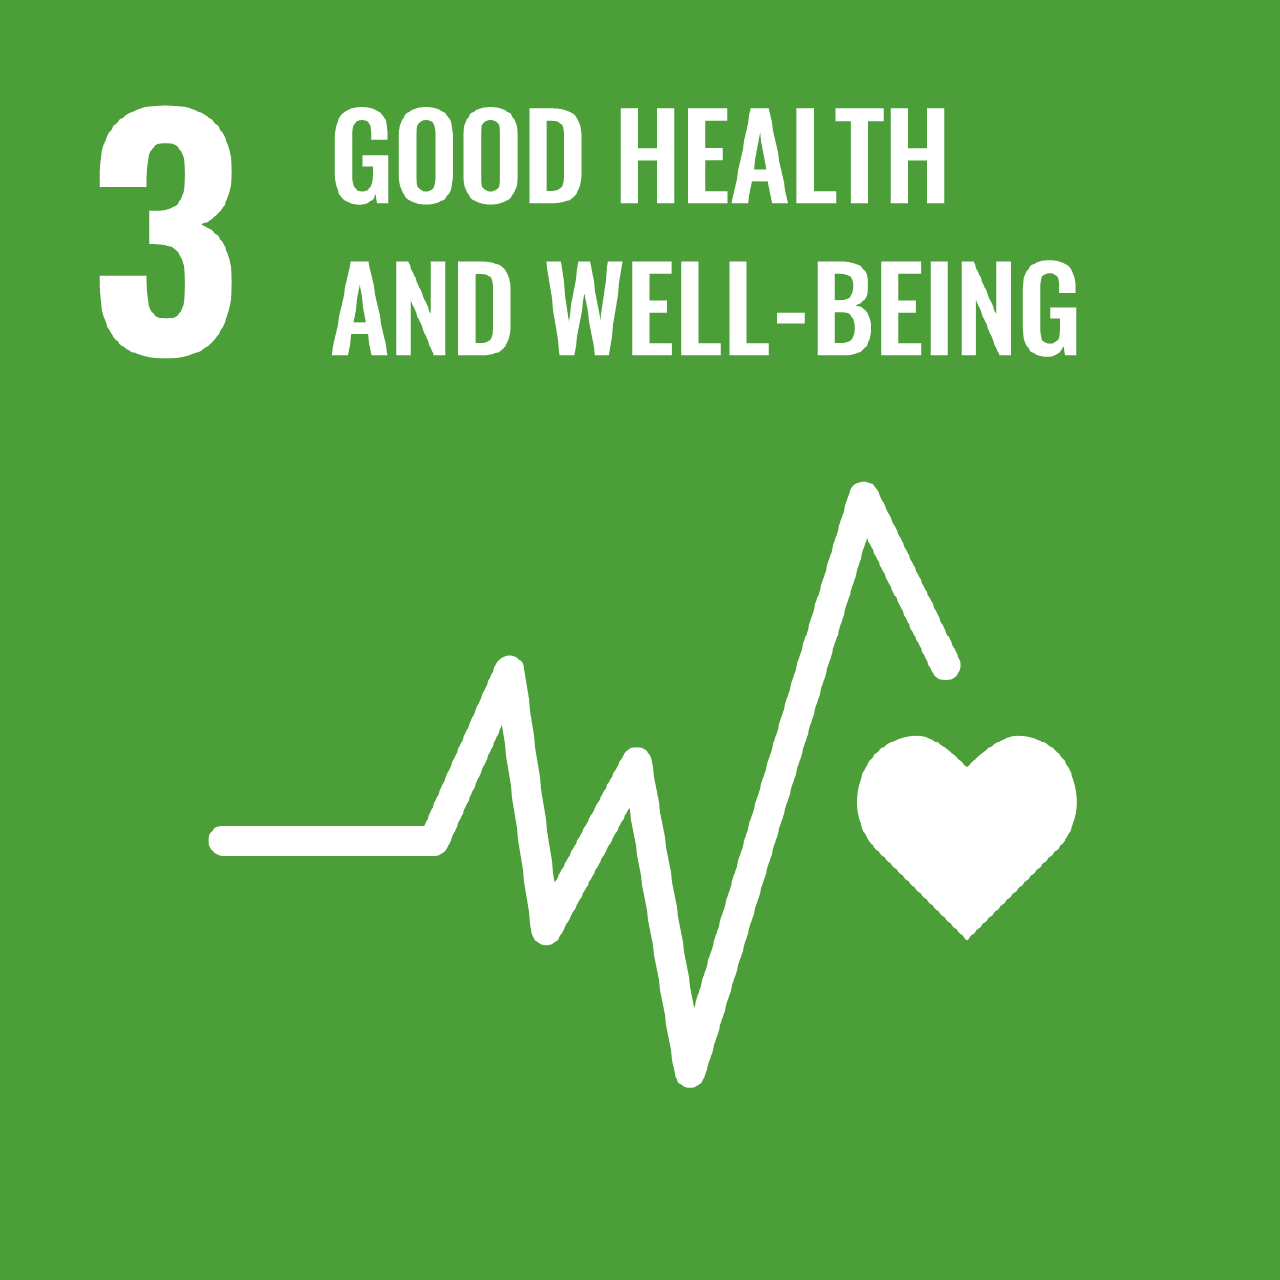 SDG 3 – Good Health and Well Being